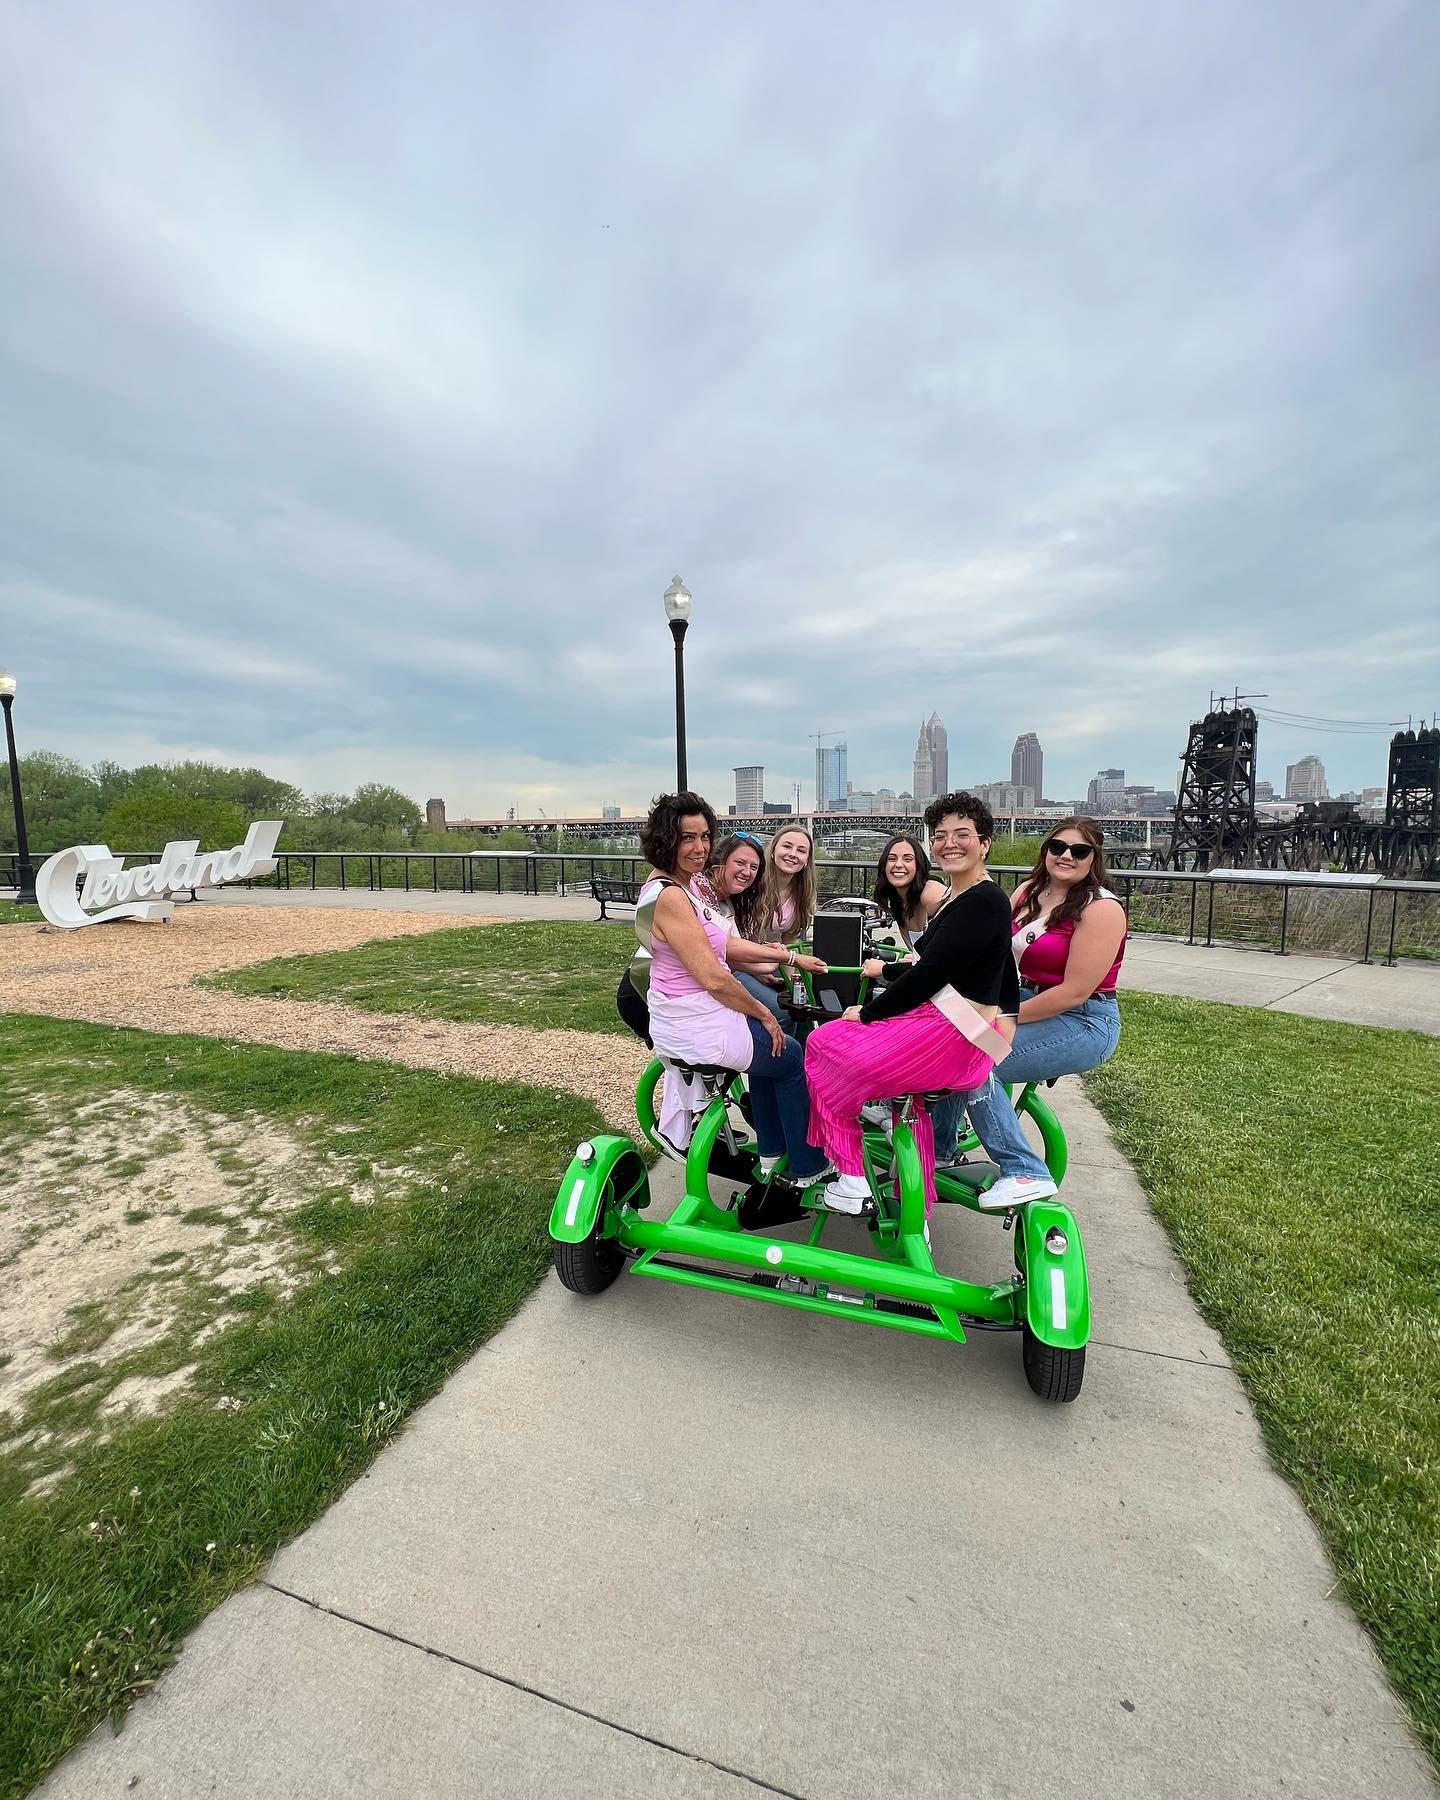 Shout out our Bride to be! This Bachelorette party took out our 6-seater wagon and made stops at the Cleveland Sign, some local pubs, and even bowling at @pinsmechco 
.
Congratulations!
.
#RideAwayBride